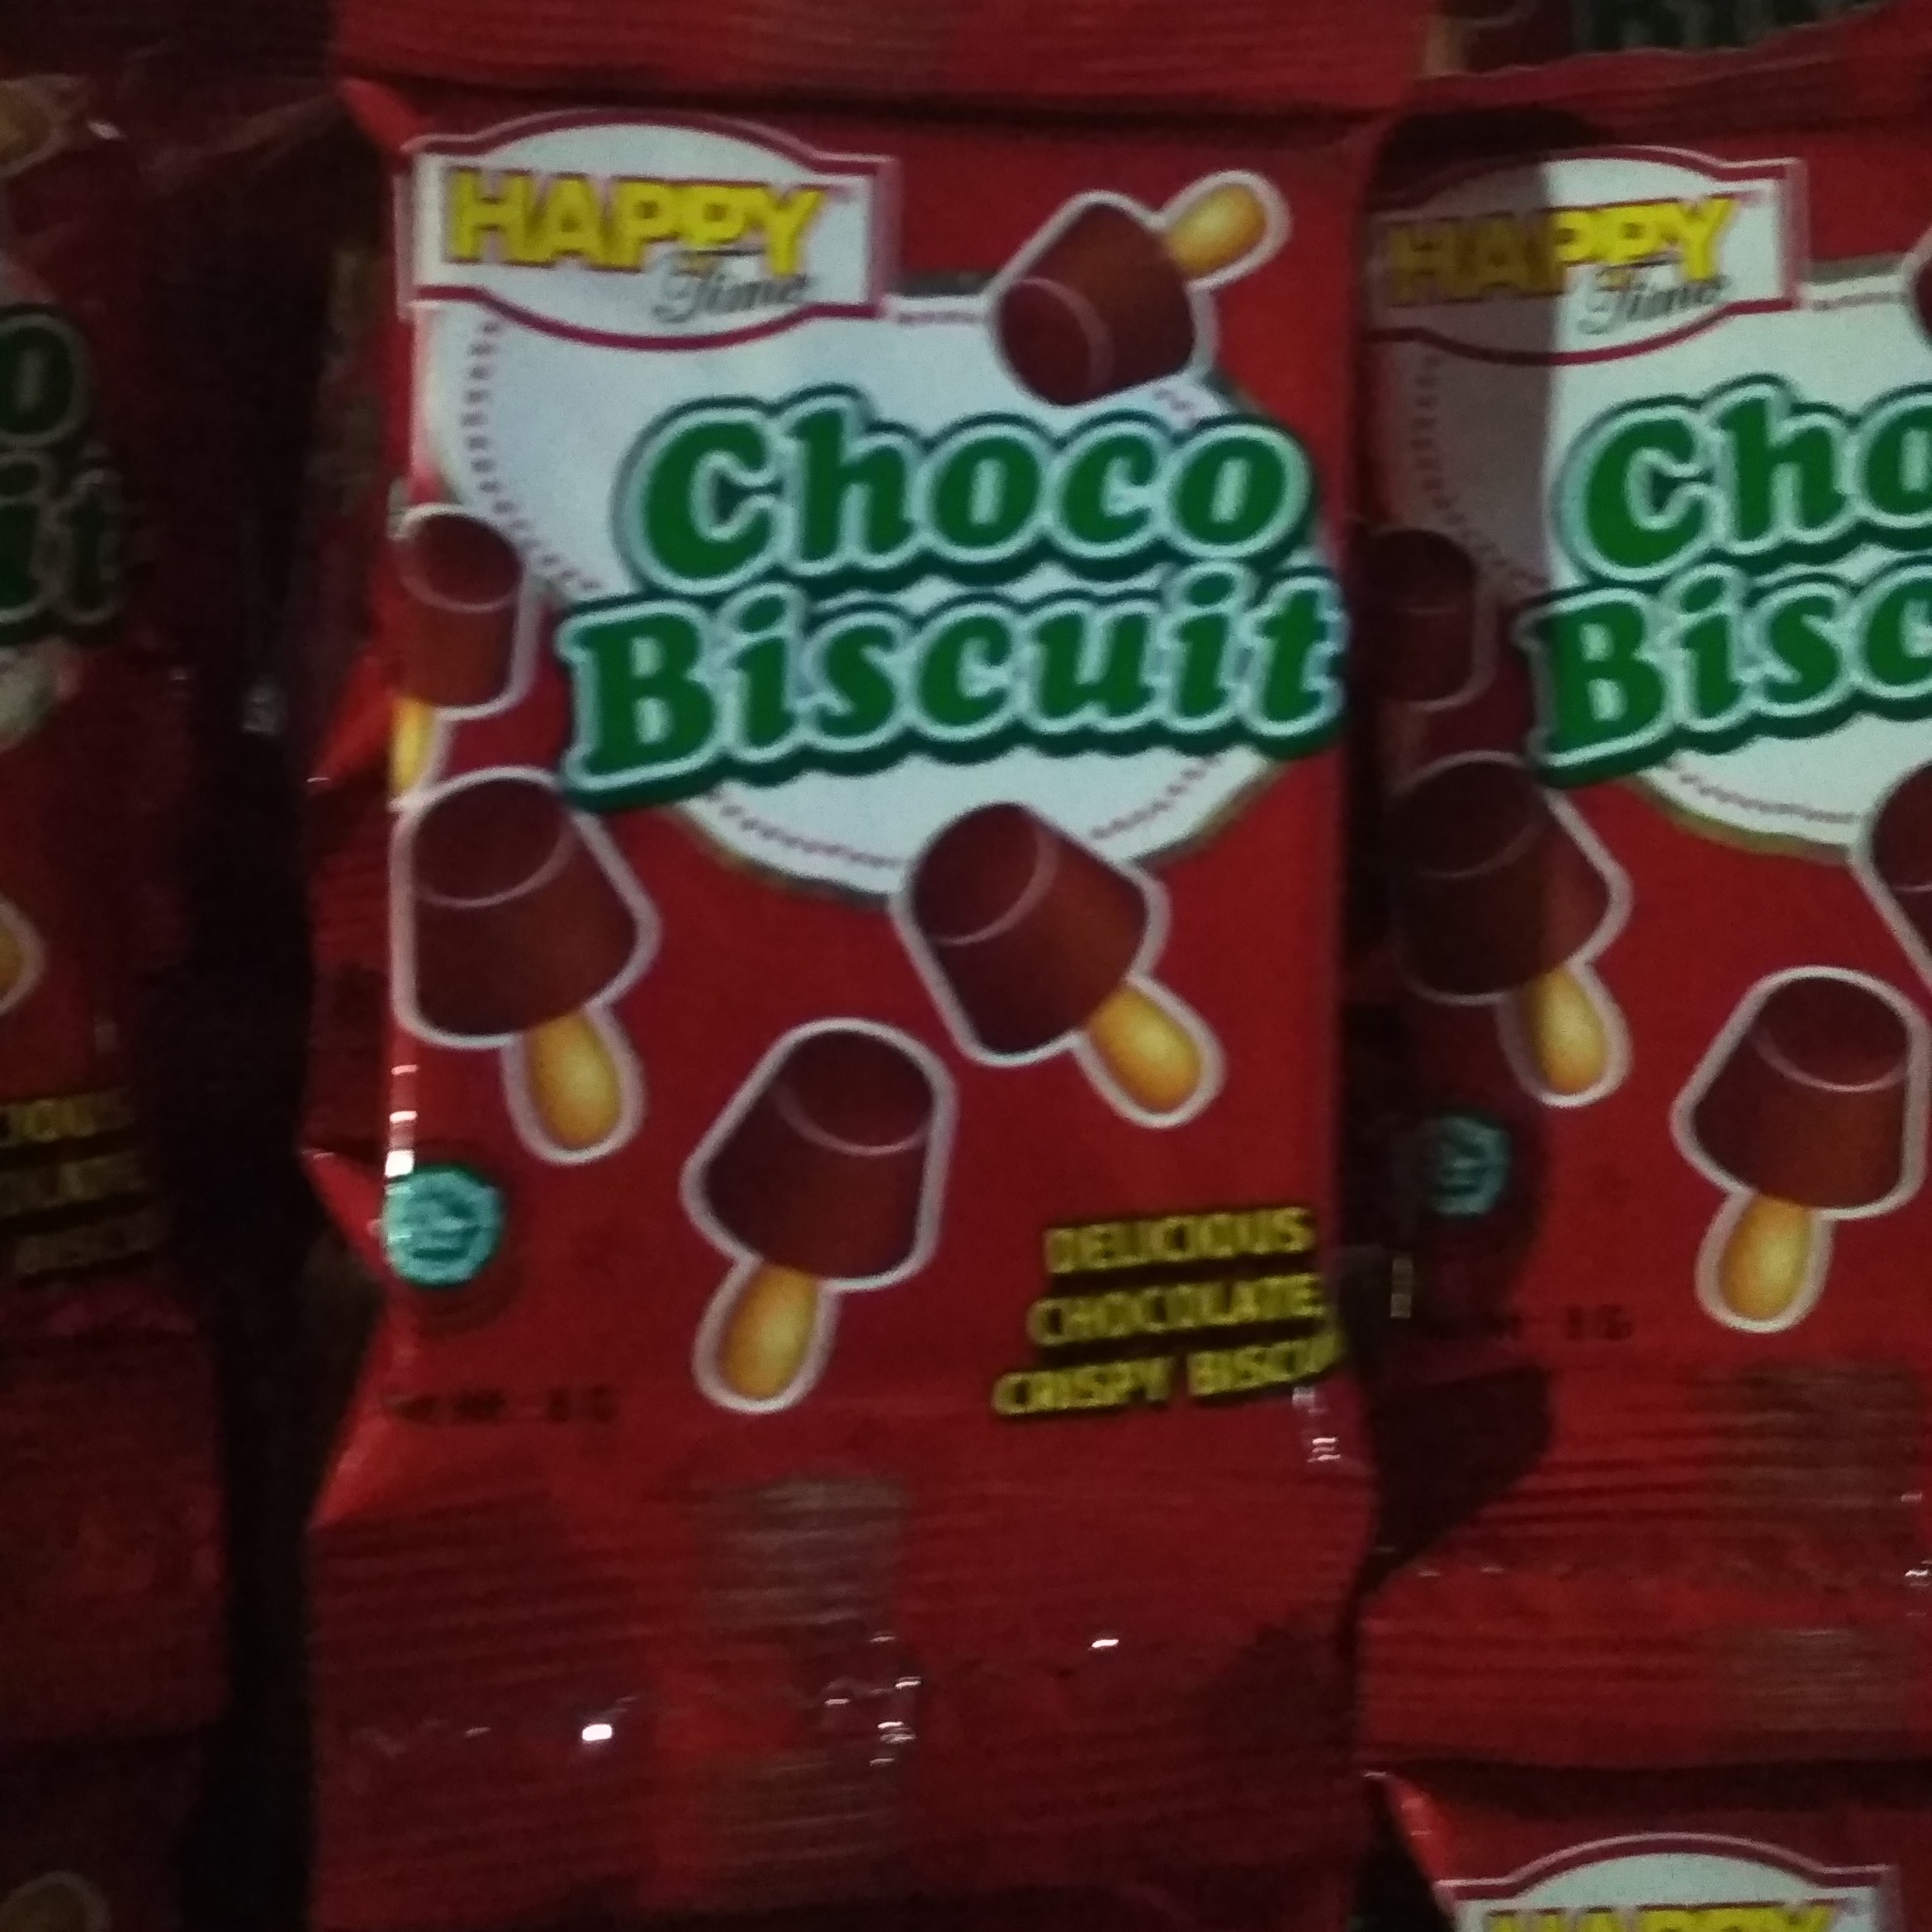 Choco Biscuit